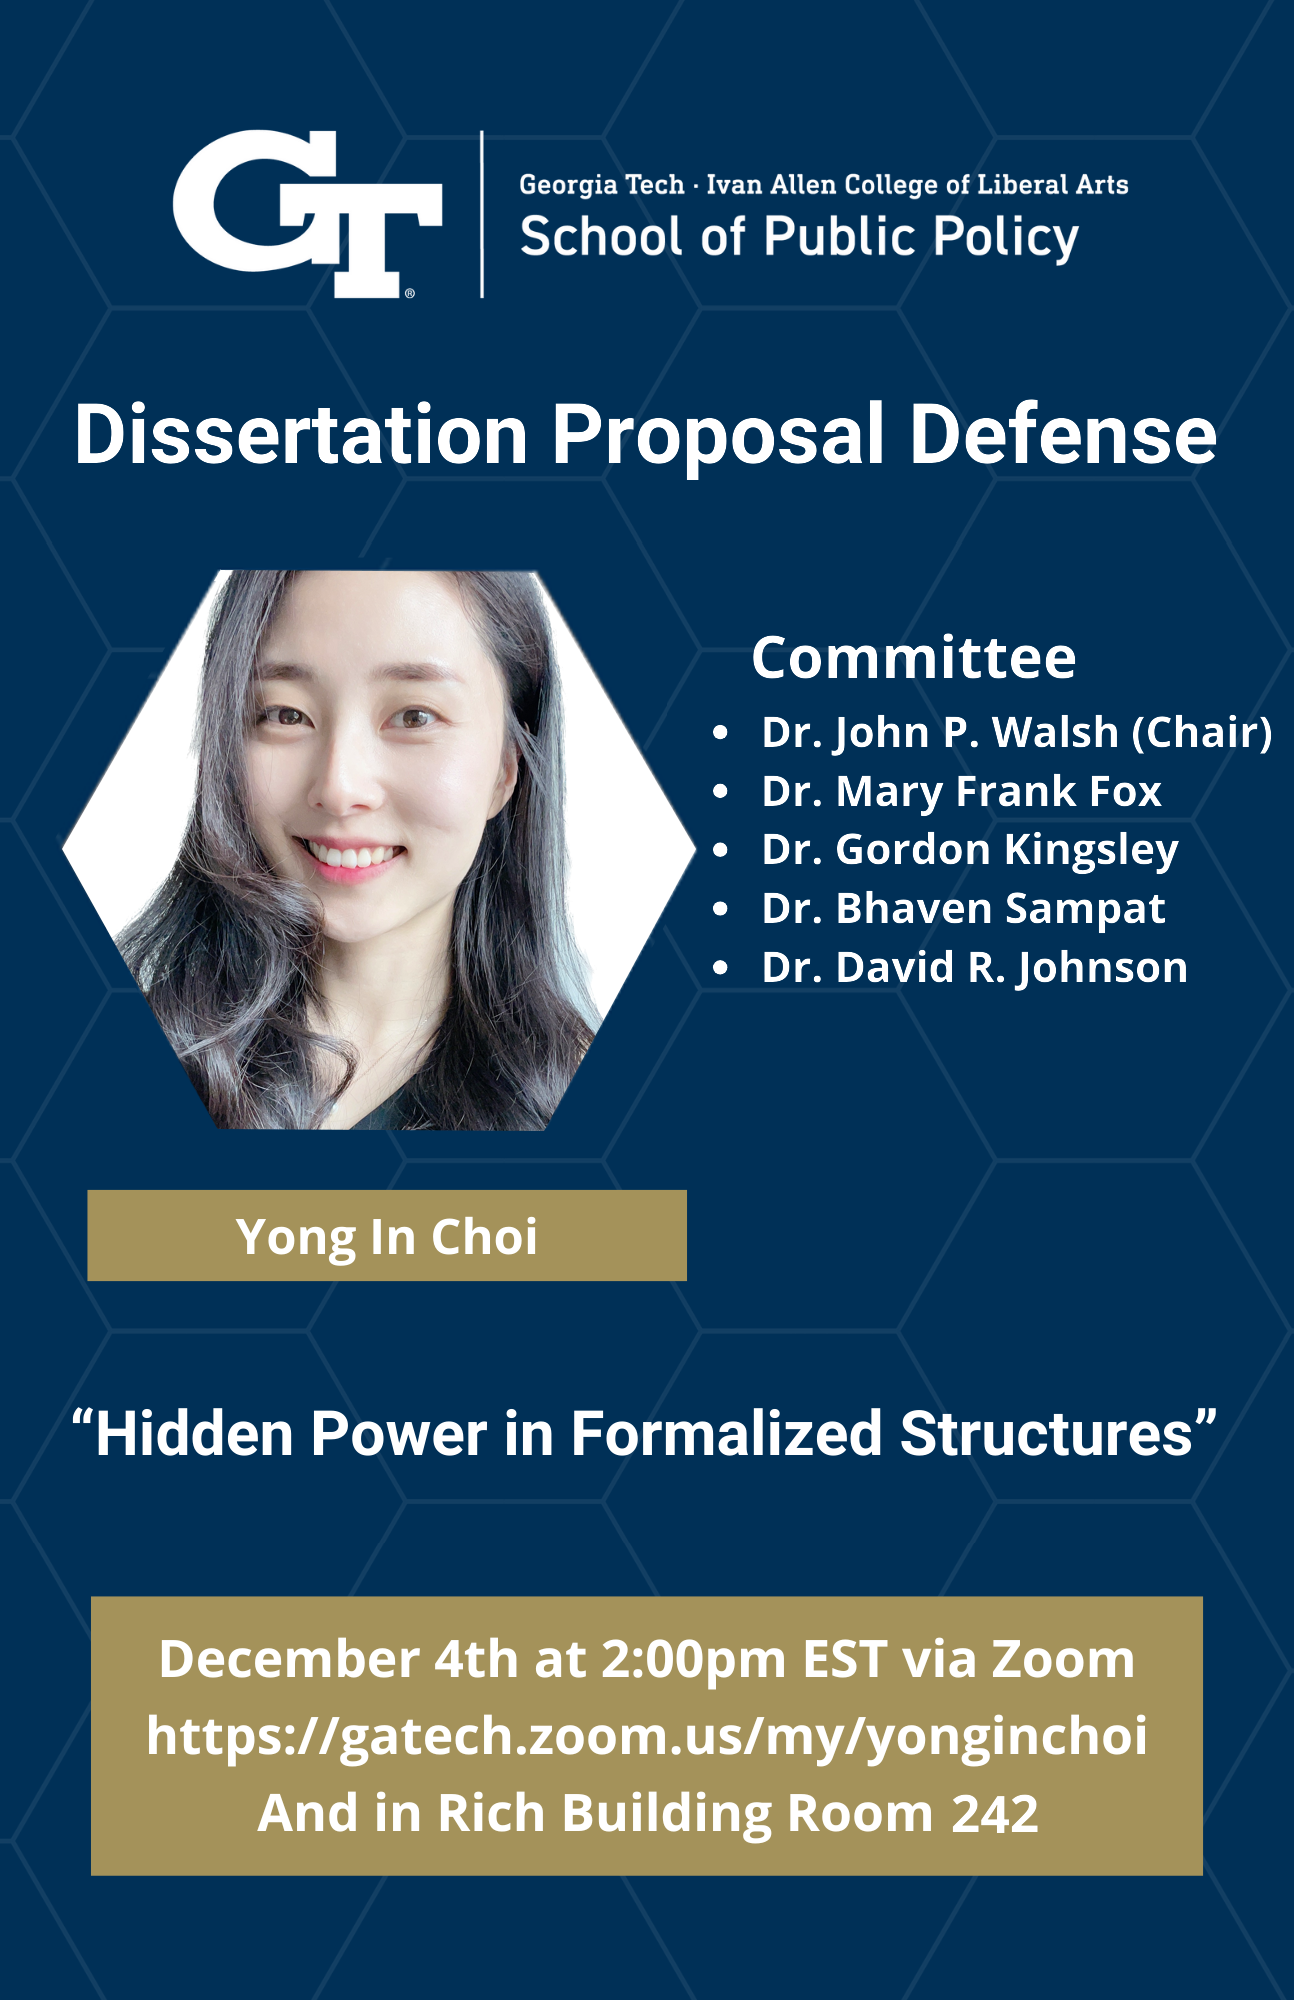 This flyer shows a headshot of Ph.D. Candidate Yong In Choi and lists the information of her Dissertation Proposal Defense at the Georgia Tech Ivan Allen College of Liberal Arts School of Public Policy. The committee consists of Dr. John P. Walsh, who is the chair, Dr. Mary Frank Fox, Dr. Gordon Kingsley, Dr. Bhaven Sampat, and Dr. David R. Johnson.</body></html>